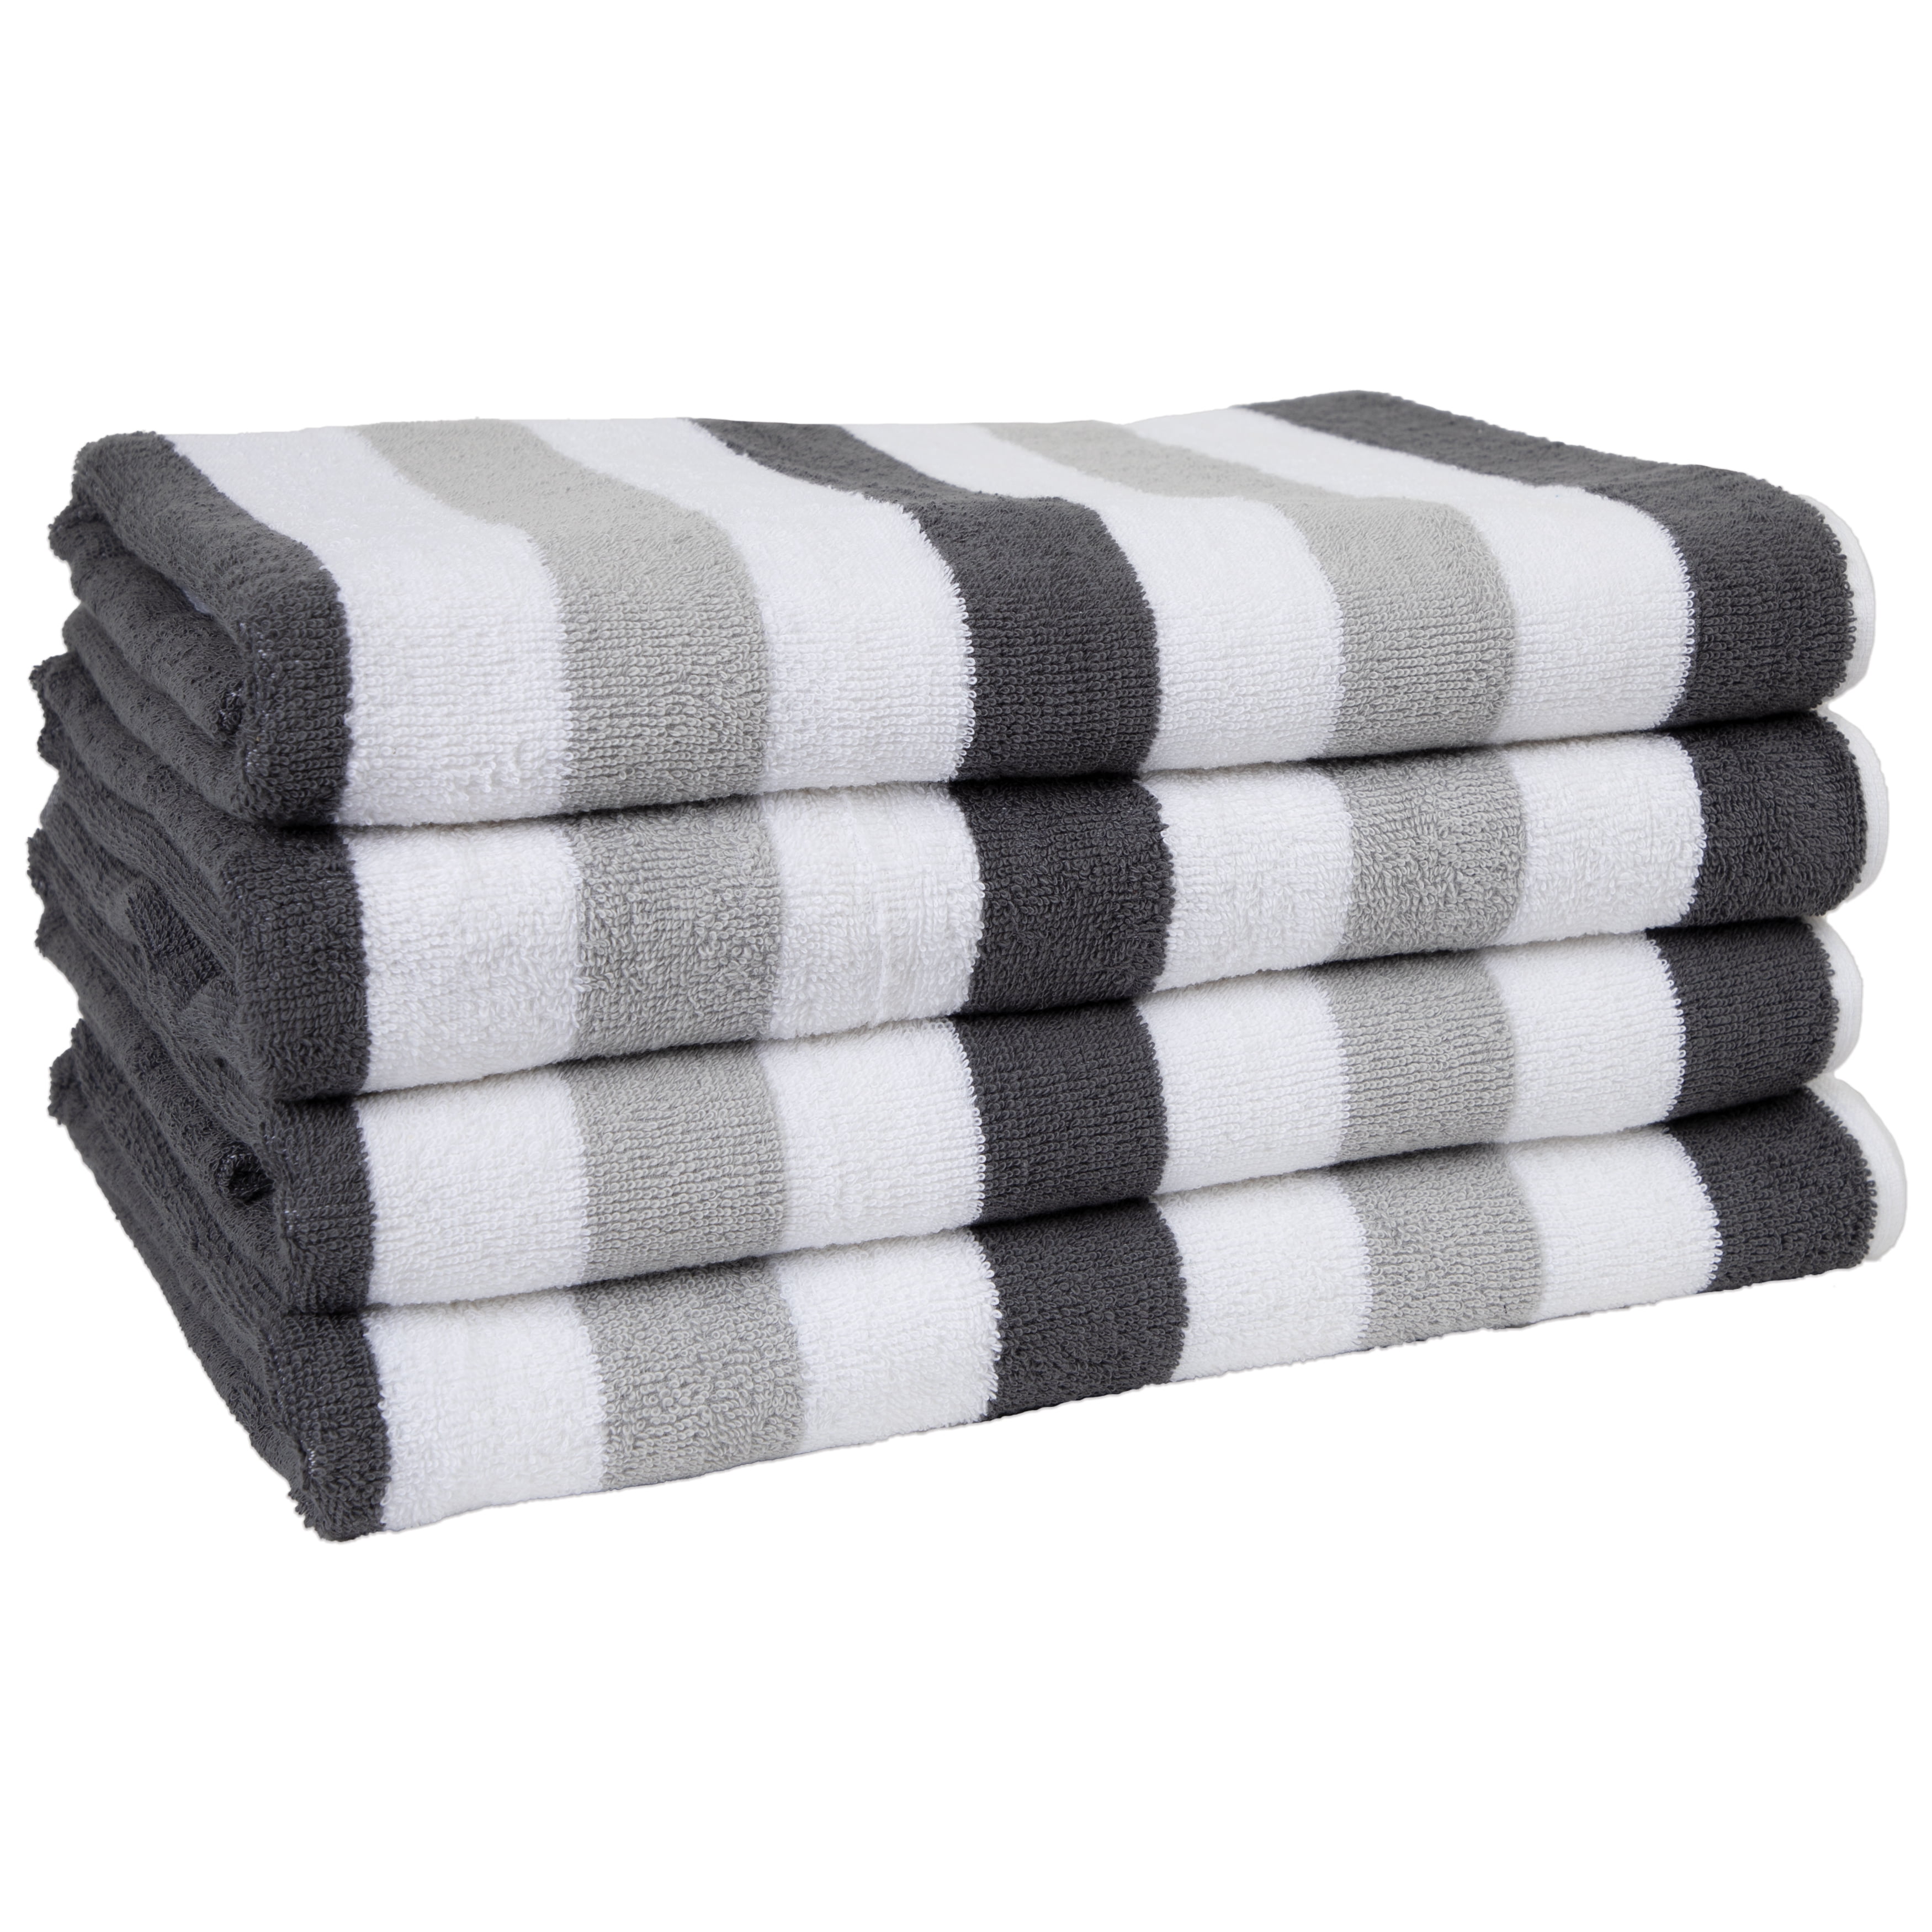 Arkwright Cabo Cabana Beach Towels, Pack of 4 Striped Oversized 30x70 Soft  Cotton Towels - Walmart.com